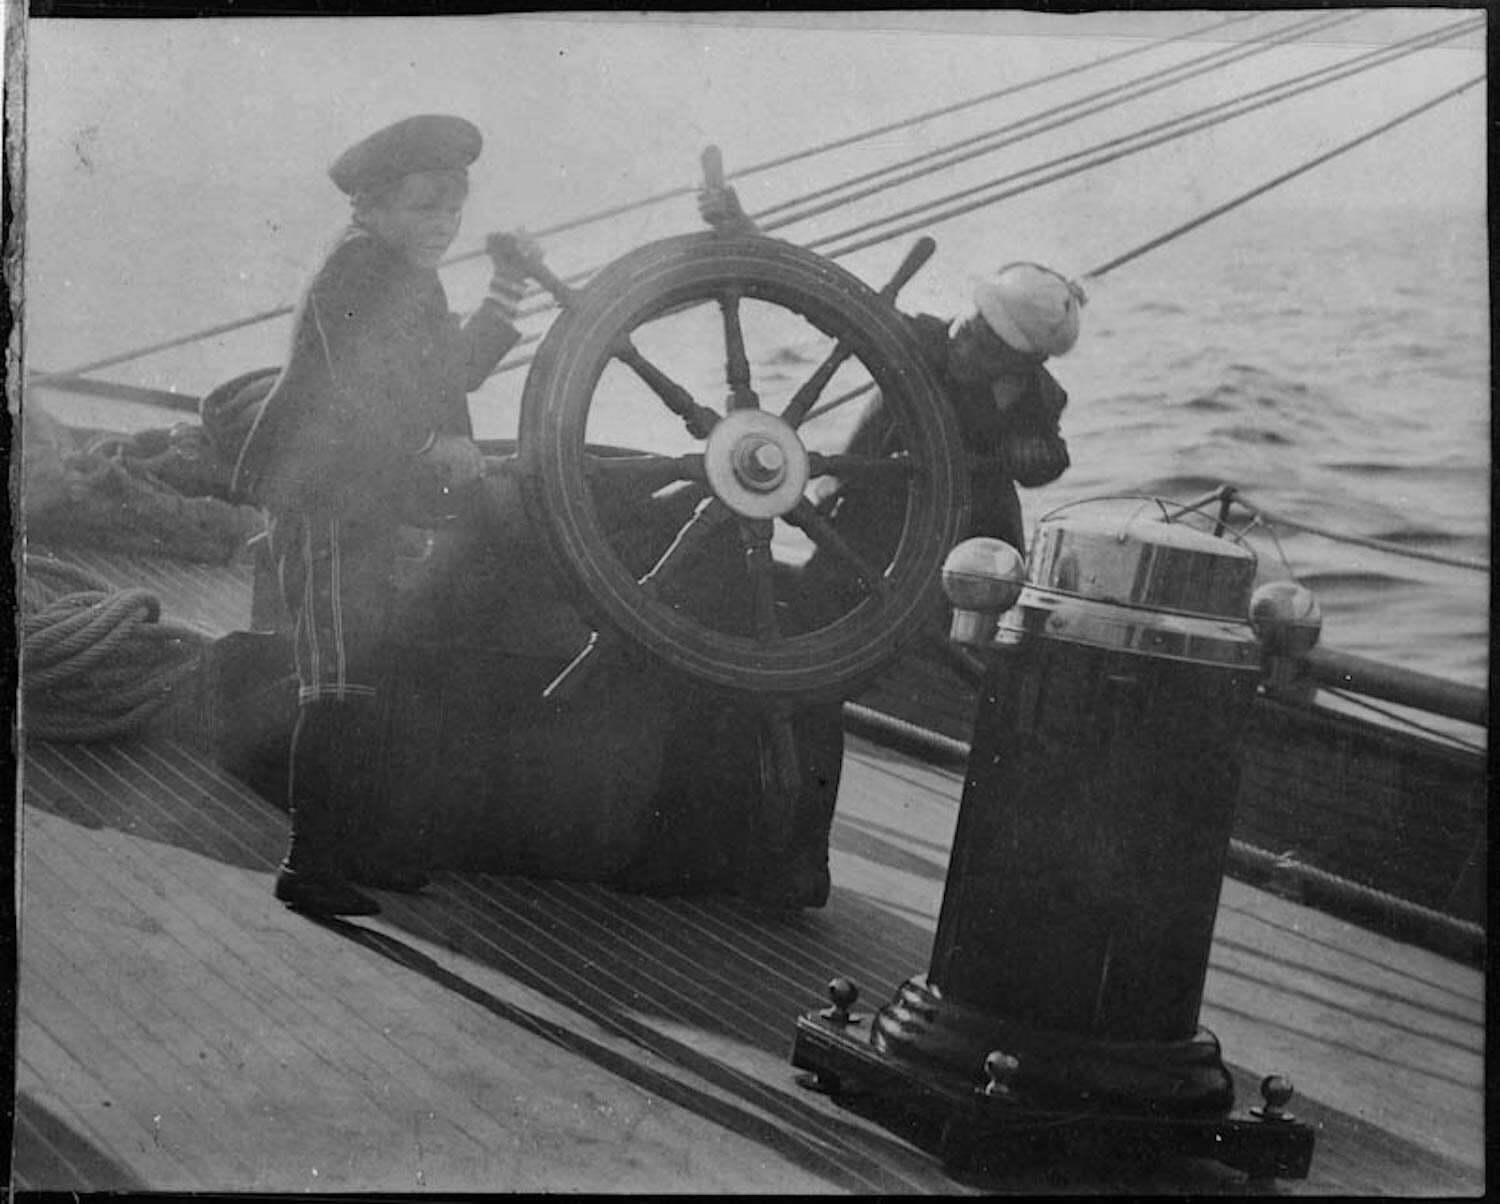 Franklin D. Roosevelt at the helm of his father's yacht "Half Moon" with a Campobello playmate, in a stiff Bay of Fundy breeze (1888).